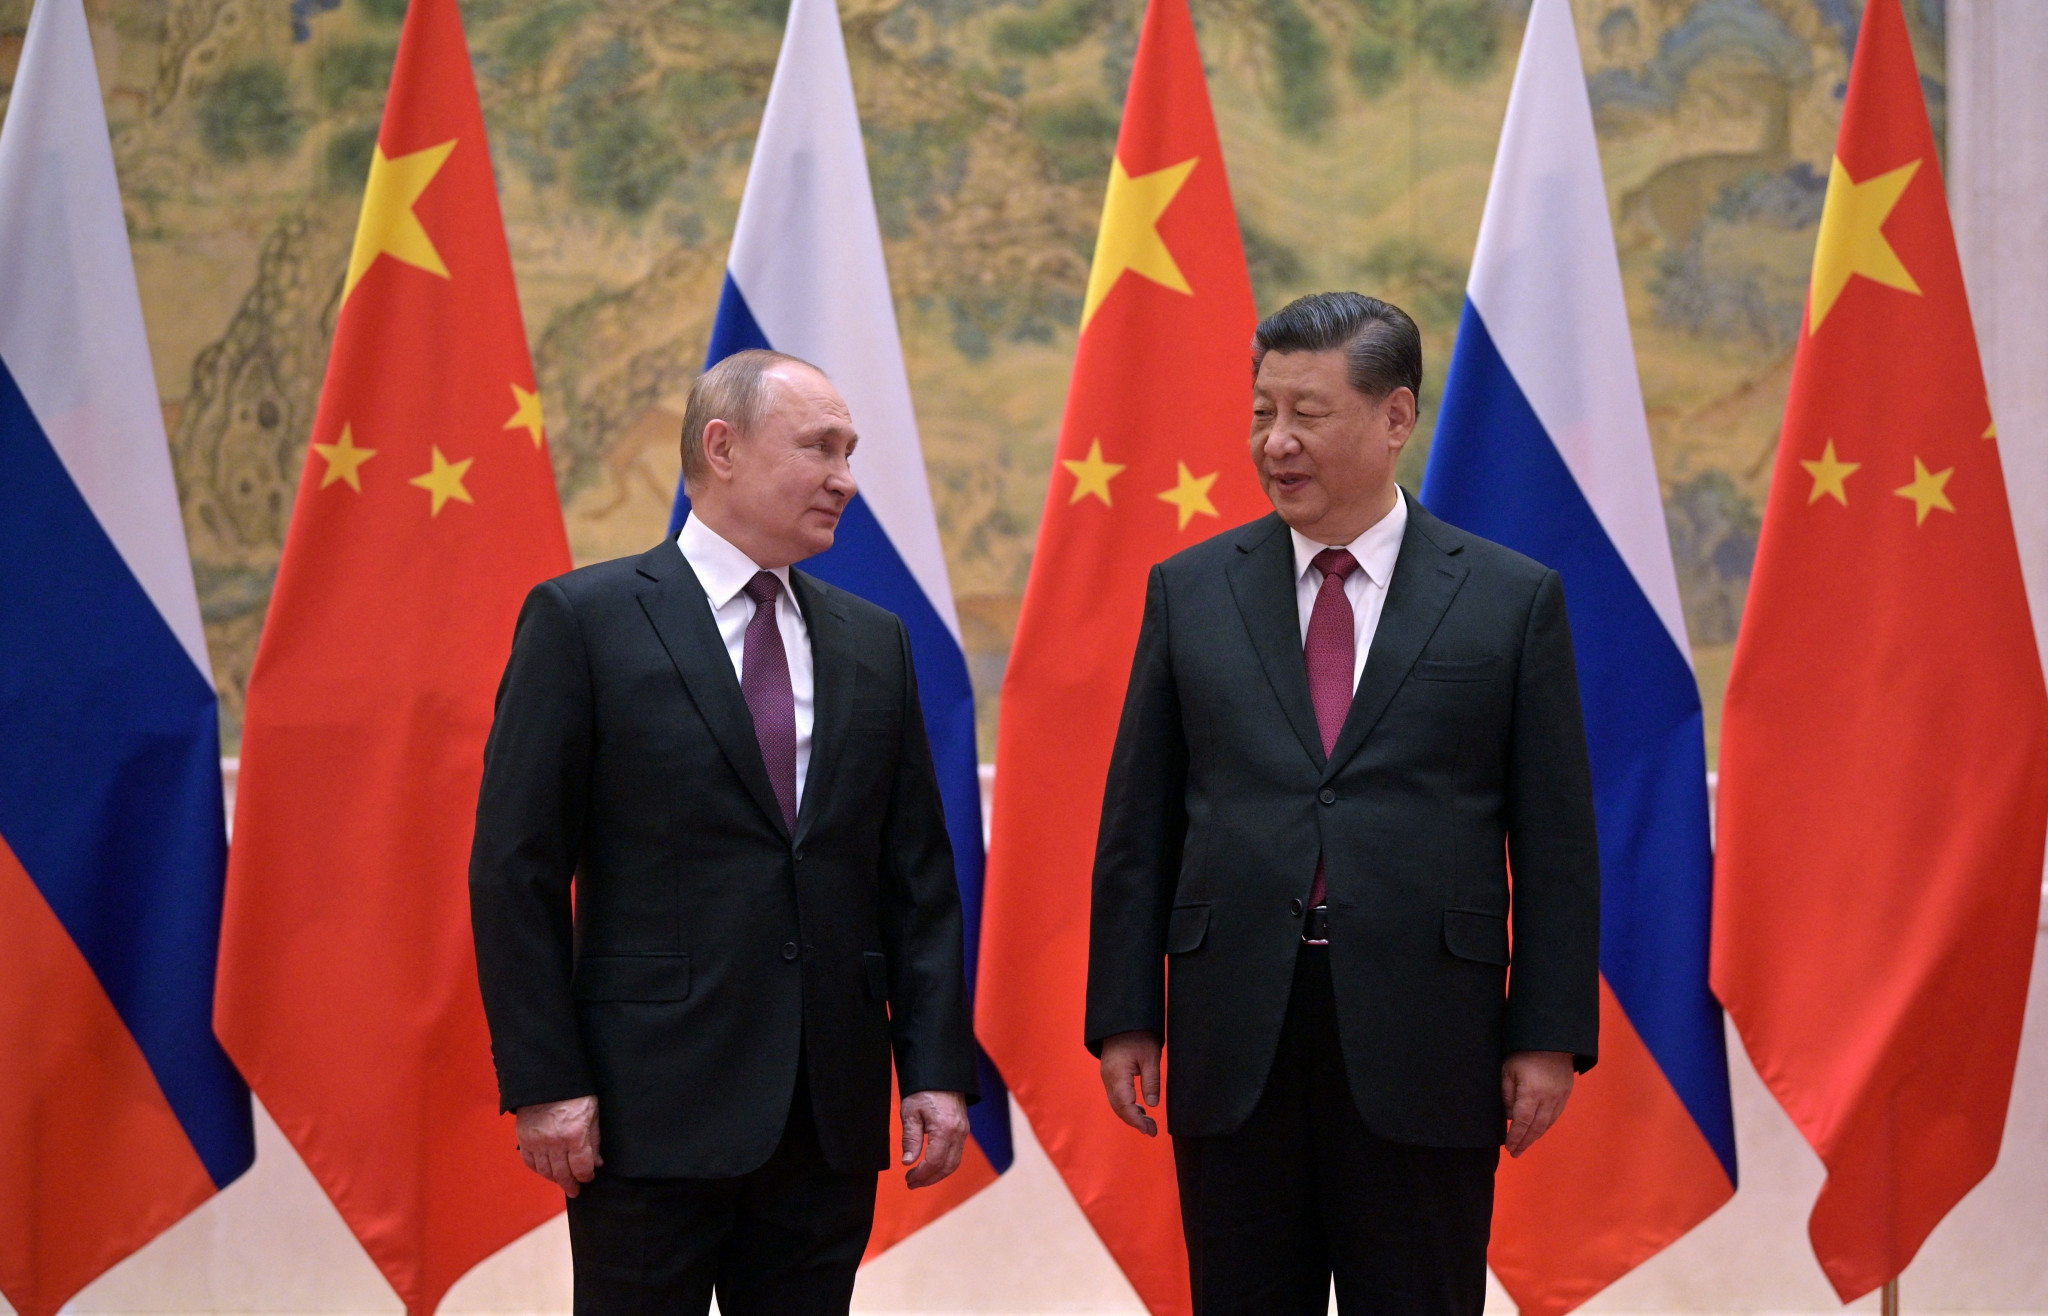 Russian and Chinese Presidents Vladimir Putin and Xi Jinping have used Beijing 2022 as an opportunity for their first face-to-face meeting in more than two years ©Getty Images